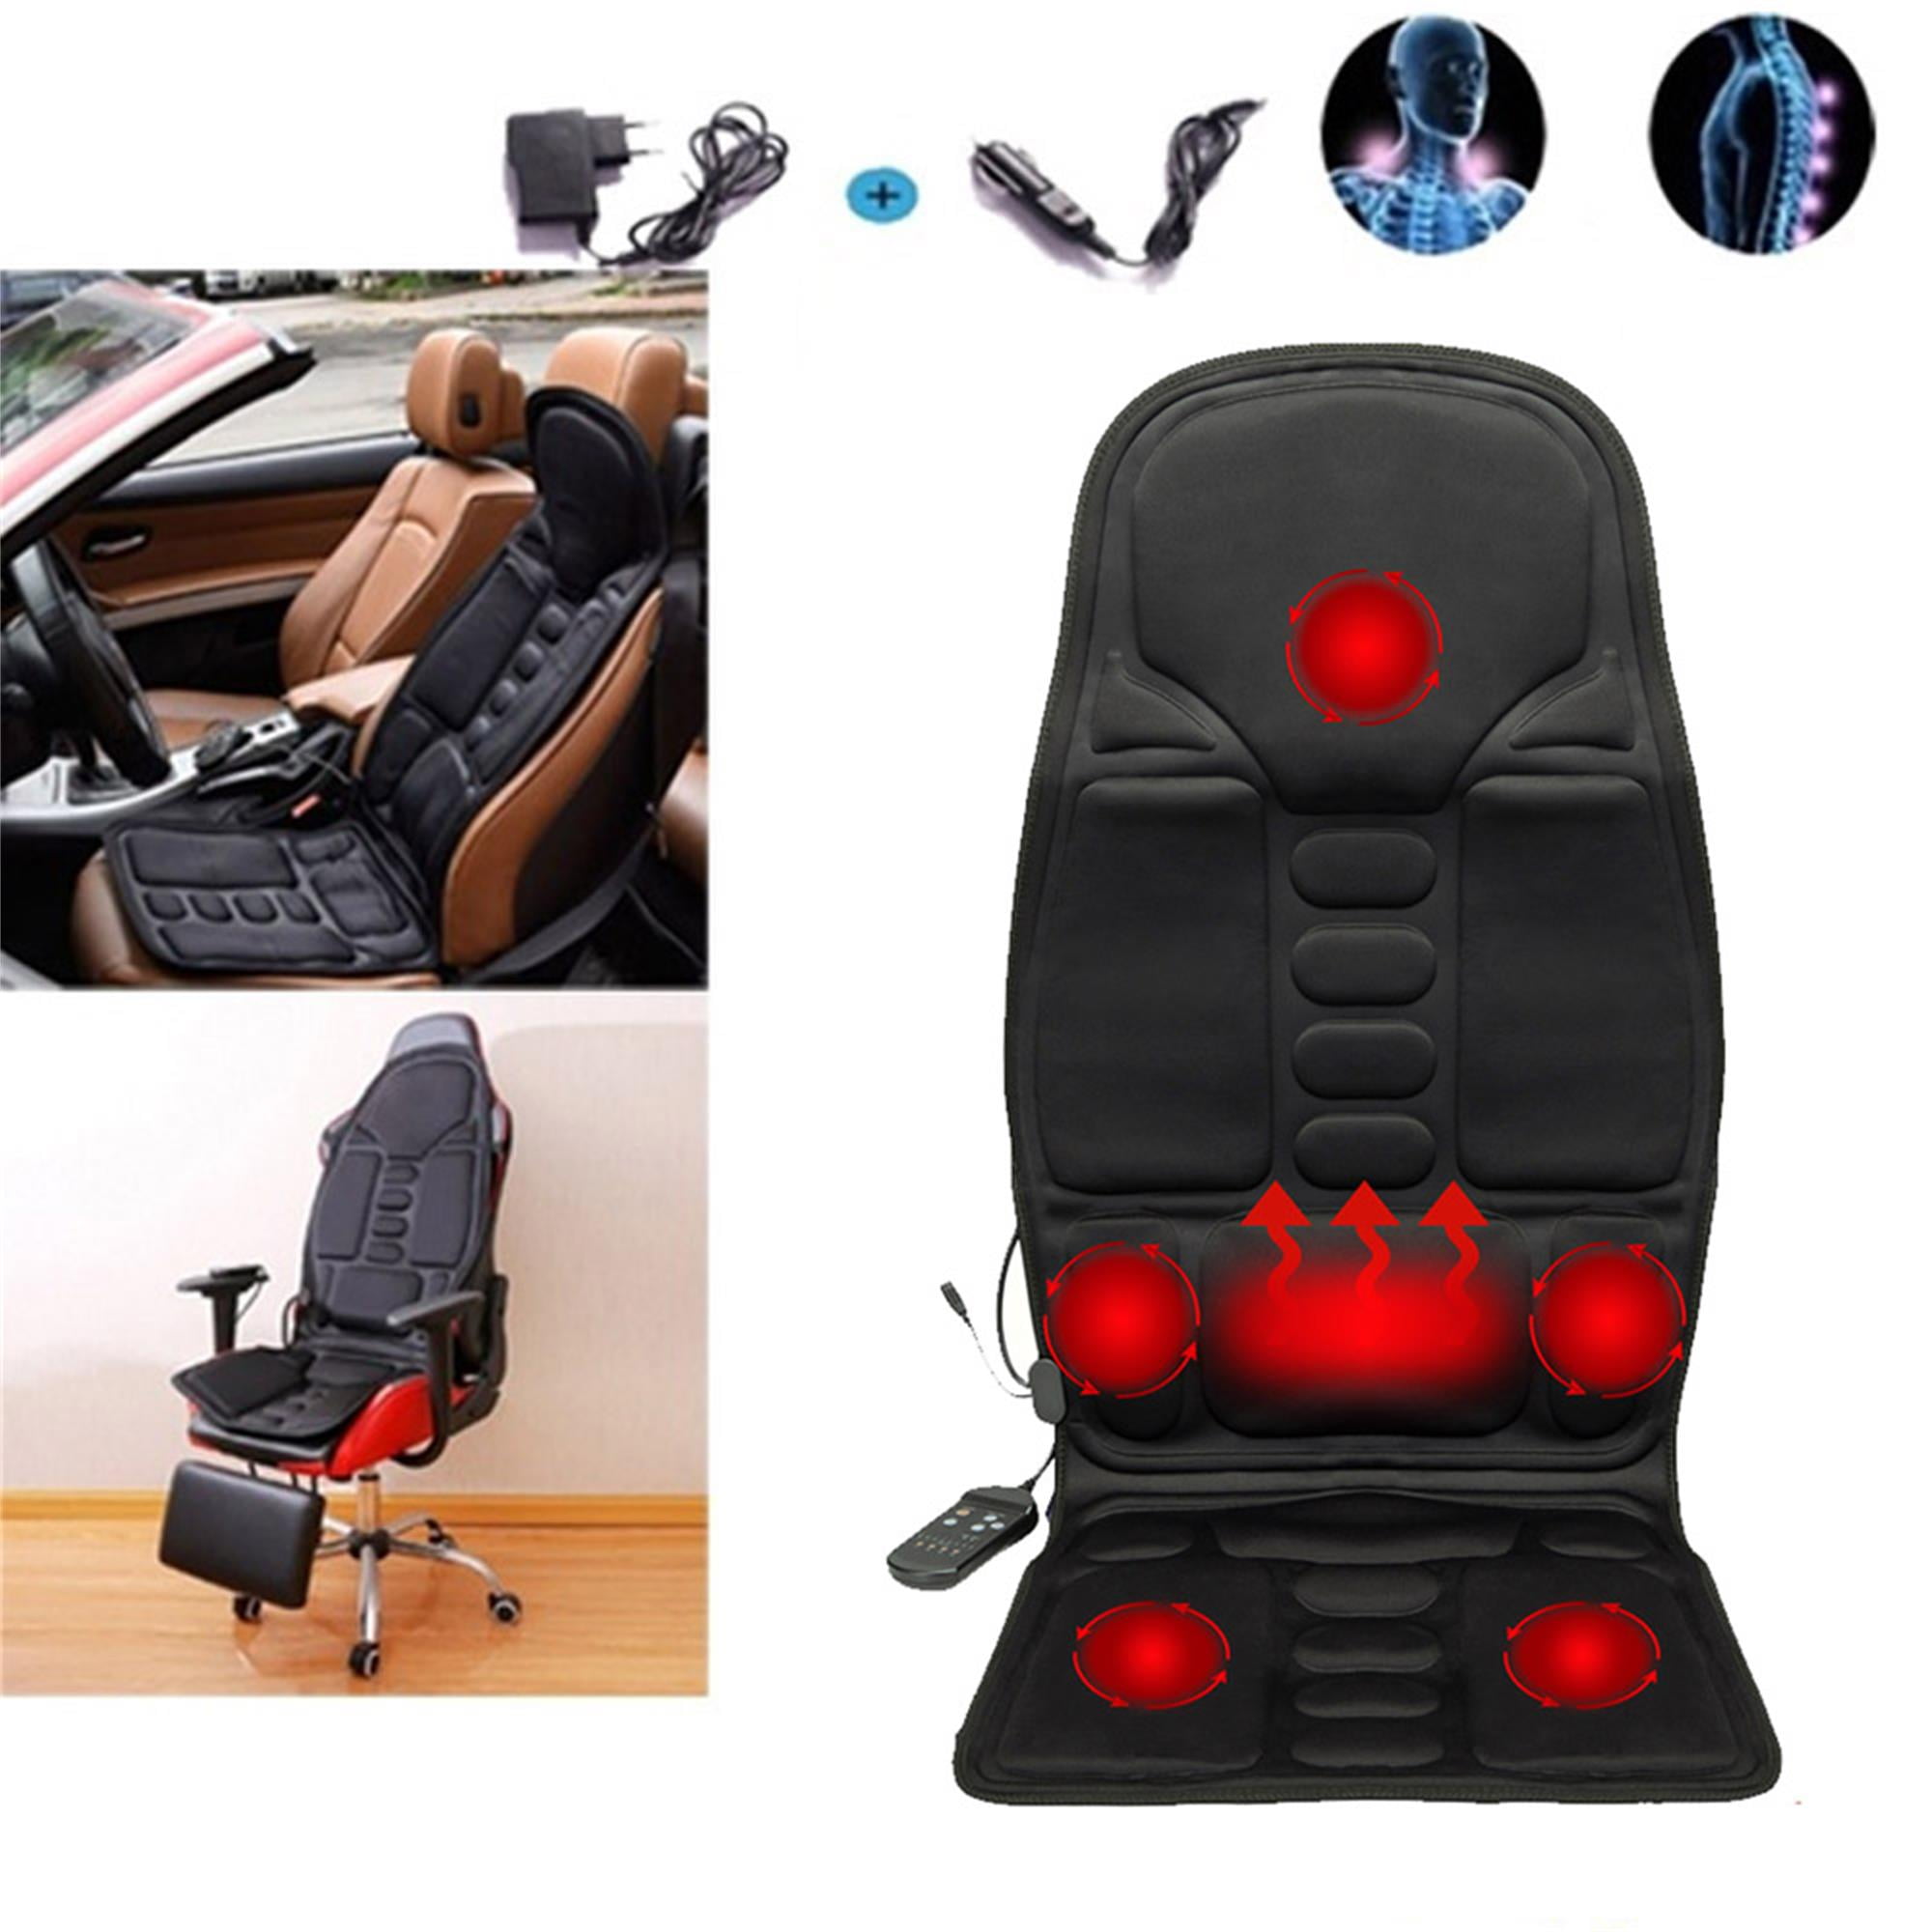 Multifunctional Car Chair Body Massage Heat Seat Cover Cushion